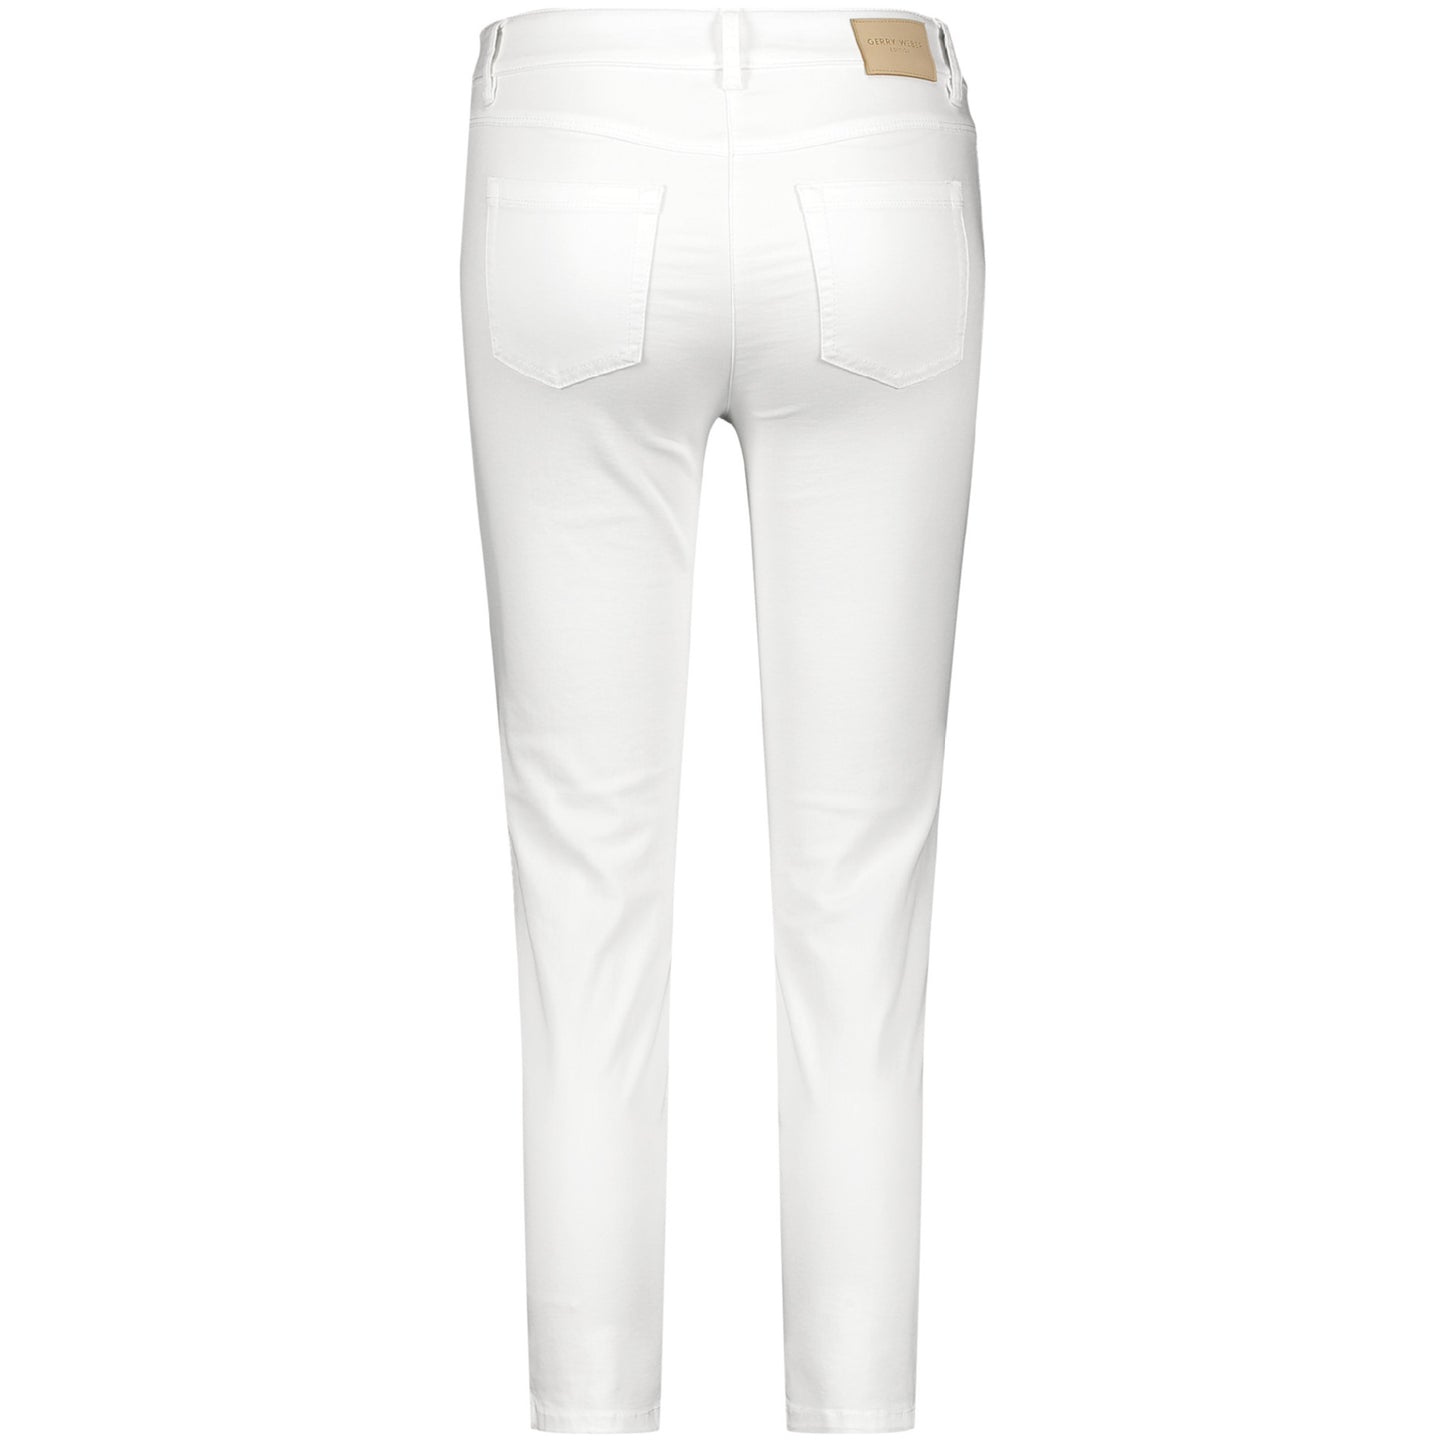 Gerry Weber 92335 67965 99600 Know White Jeans